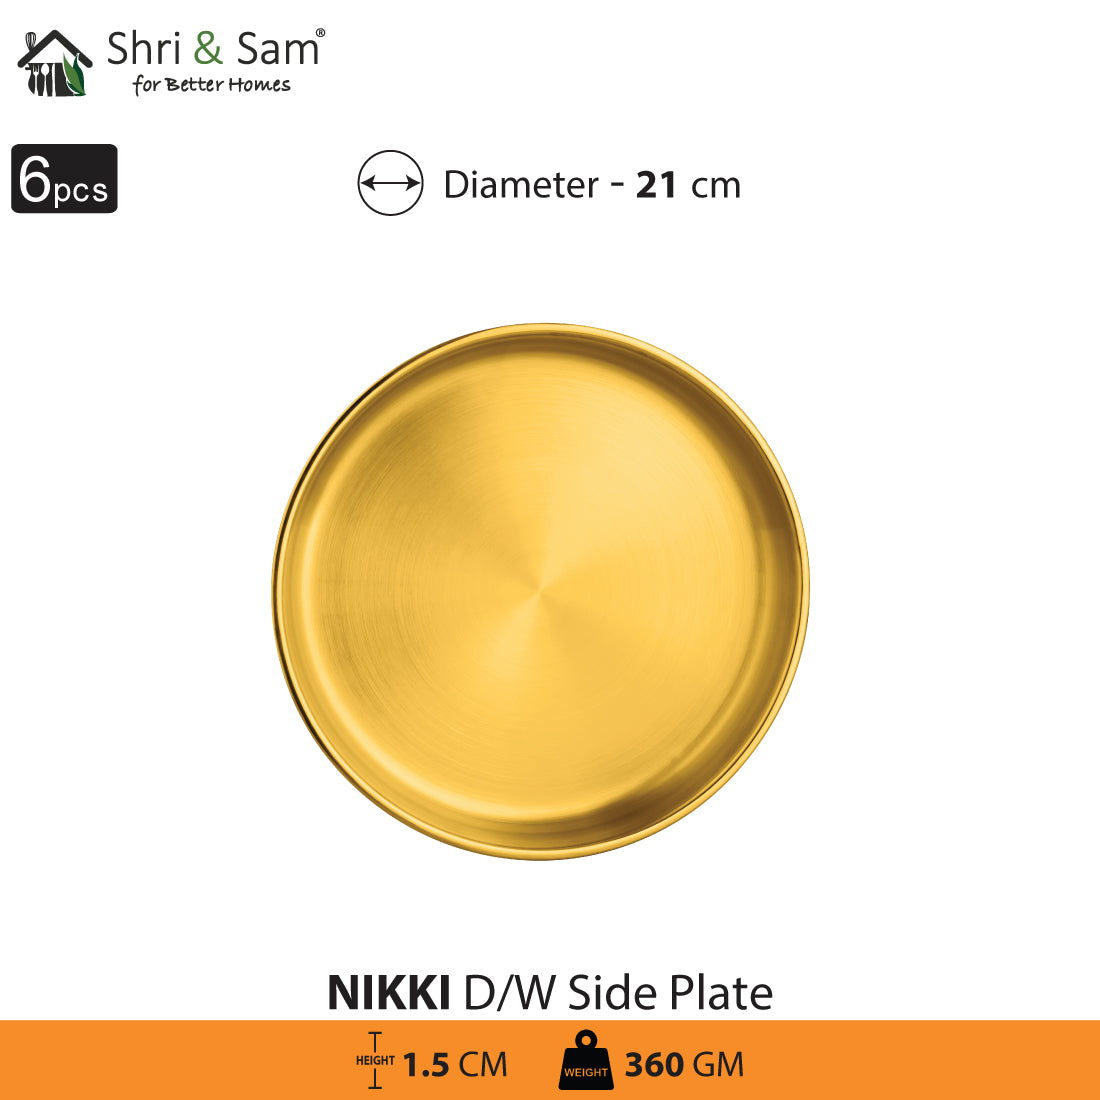 Stainless Steel 6 PCS Double Wall Side Plate with Gold PVD Coating Nikki